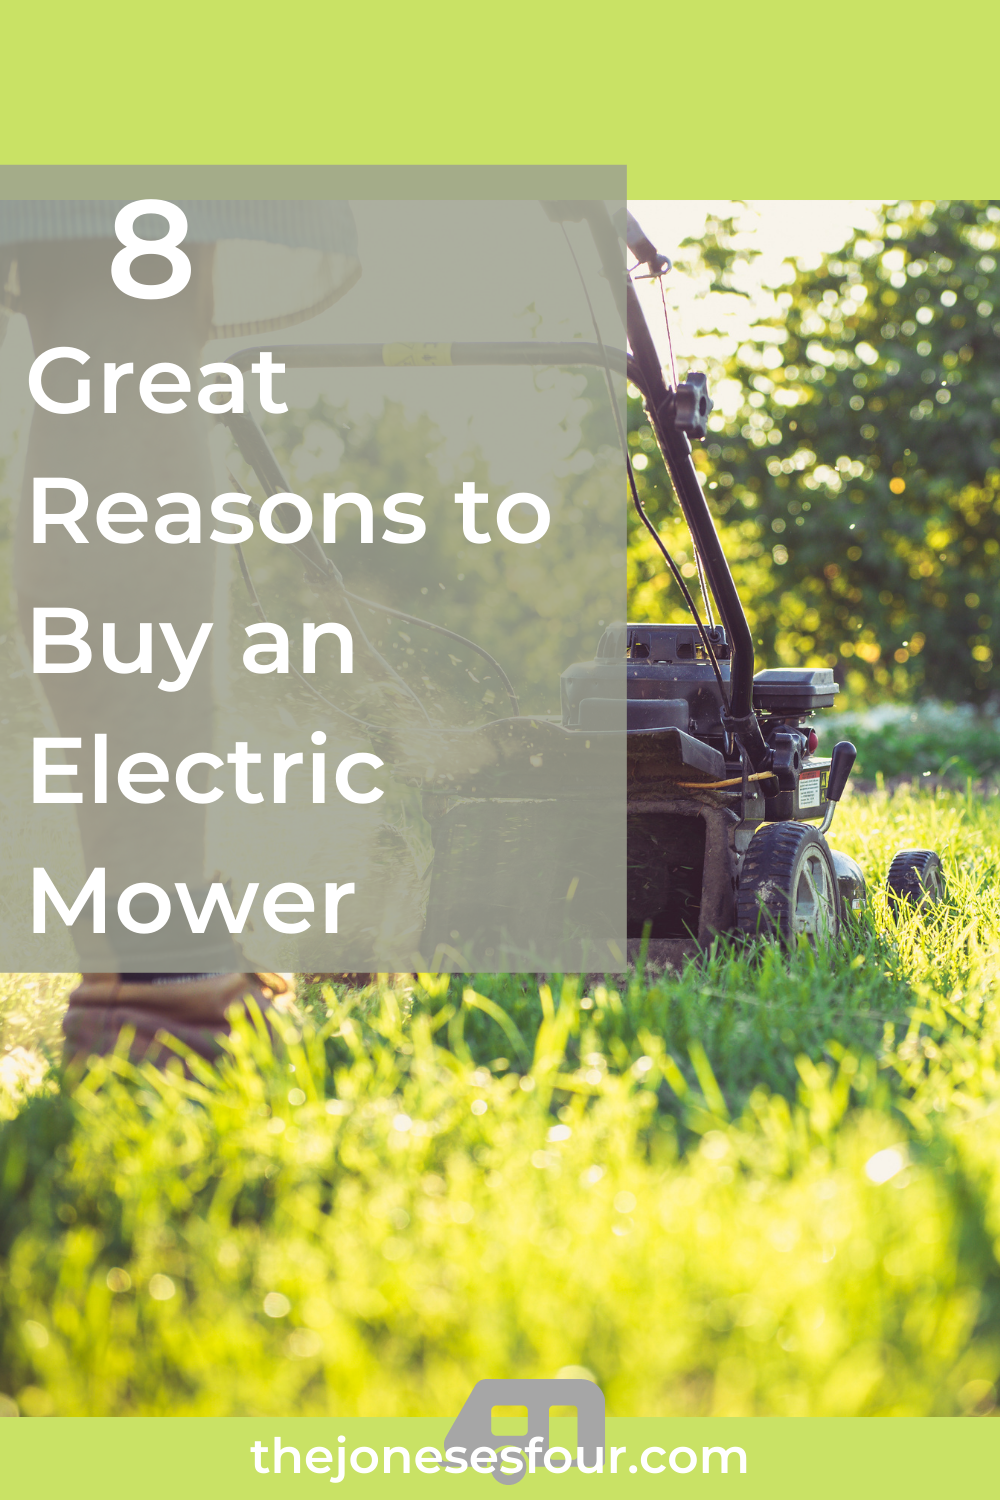 8 Great Reasons to Buy an Electric Lawn Mower